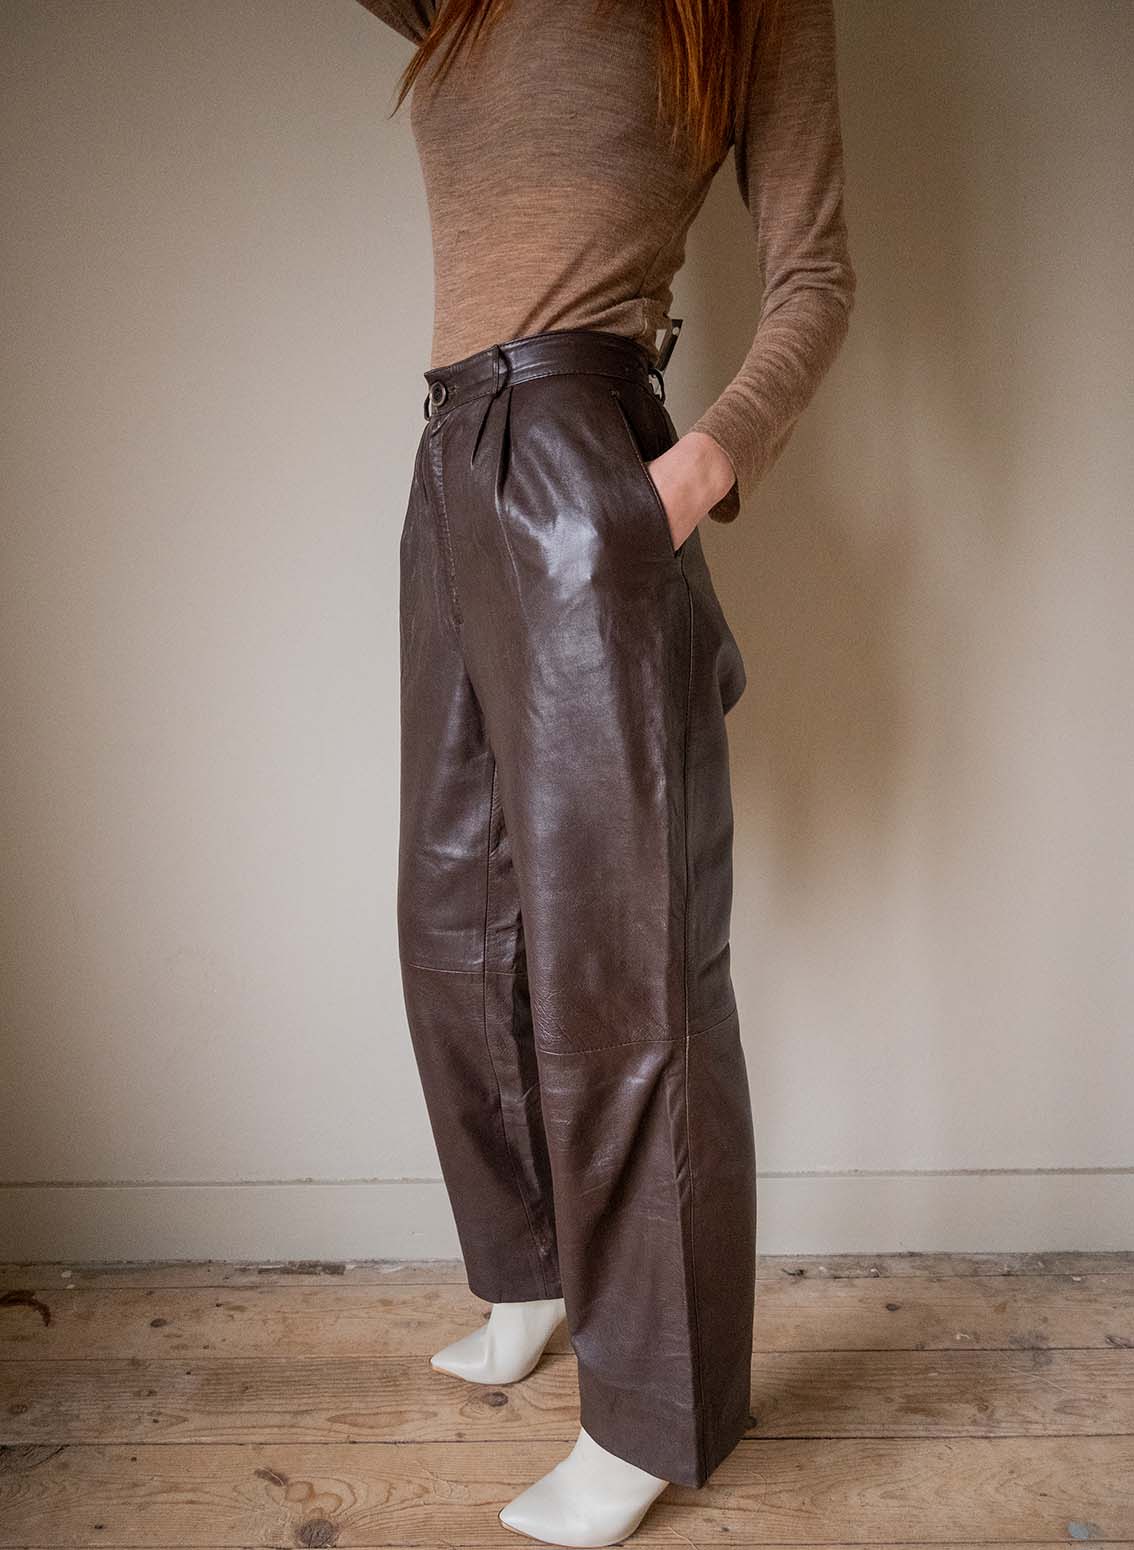 The dark brown leather pant – Size up to 31 inch / size M/L – ANDPAUSE